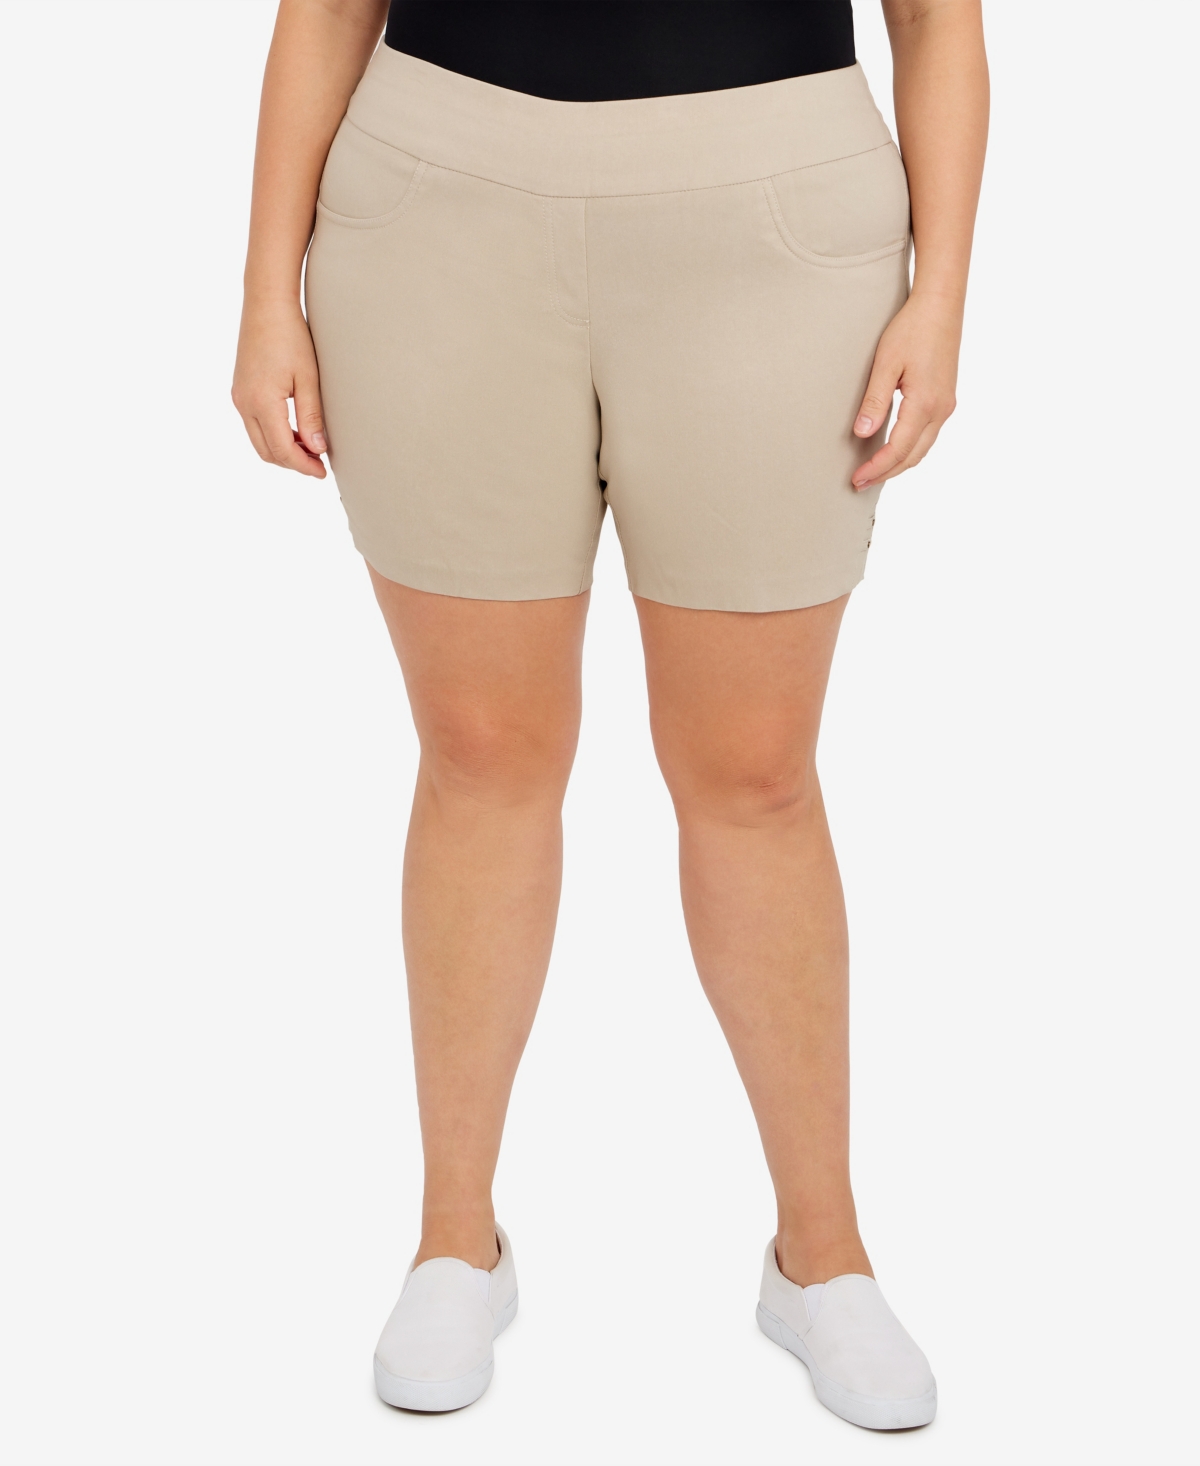 Hearts Of Palm Plus Size Essentials Solid Color Tech Stretch Shorts with Elastic Waistband